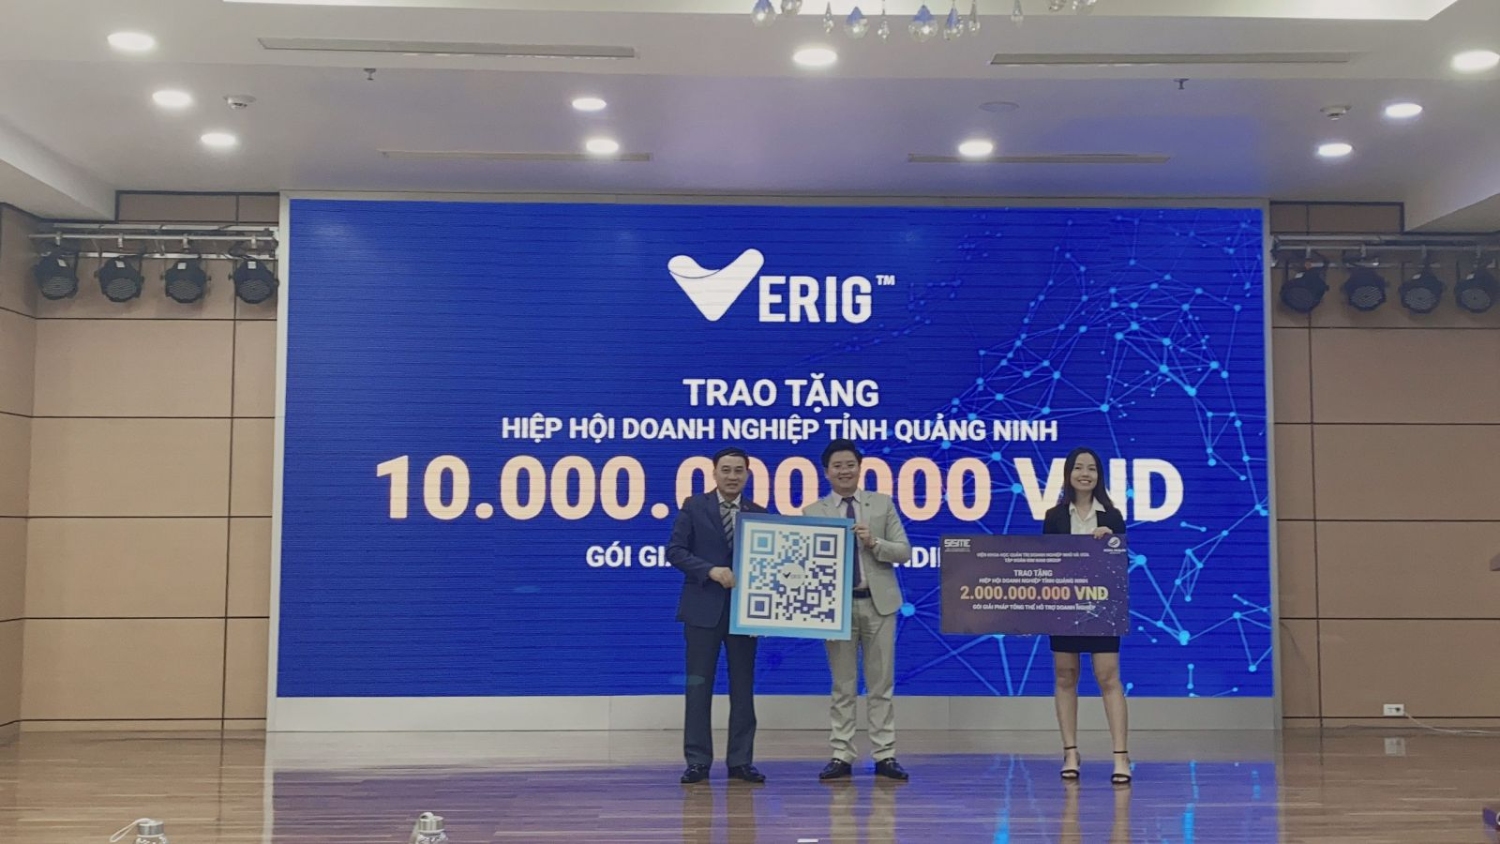 Connecting trading promotion and business investment in Quang Ninh province with Kim Nam Group on a digital platform